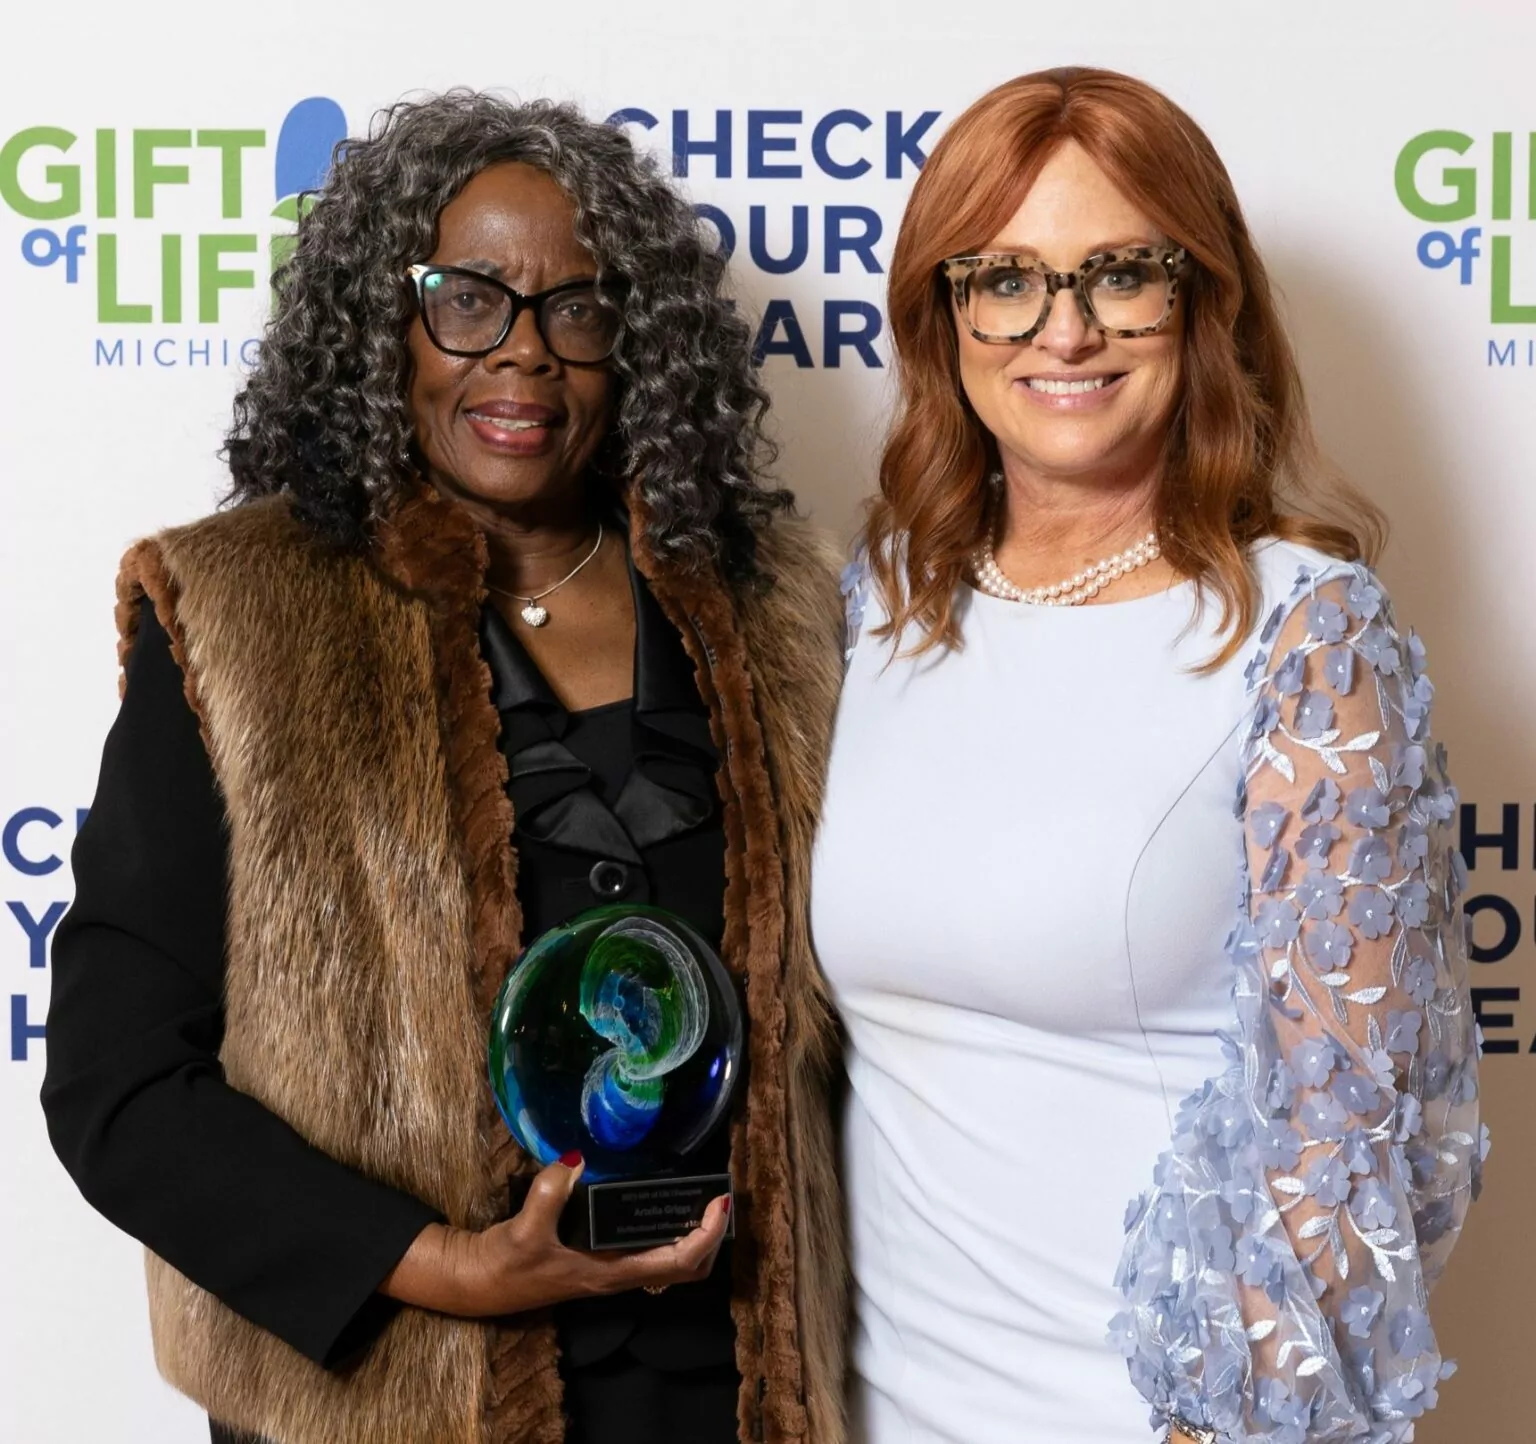 Gift of Life's President and CEO, Dorrie Dils, presented the Multicultural Difference Maker award to donor mother Artelia Griggs at the 2023 Champions Gala